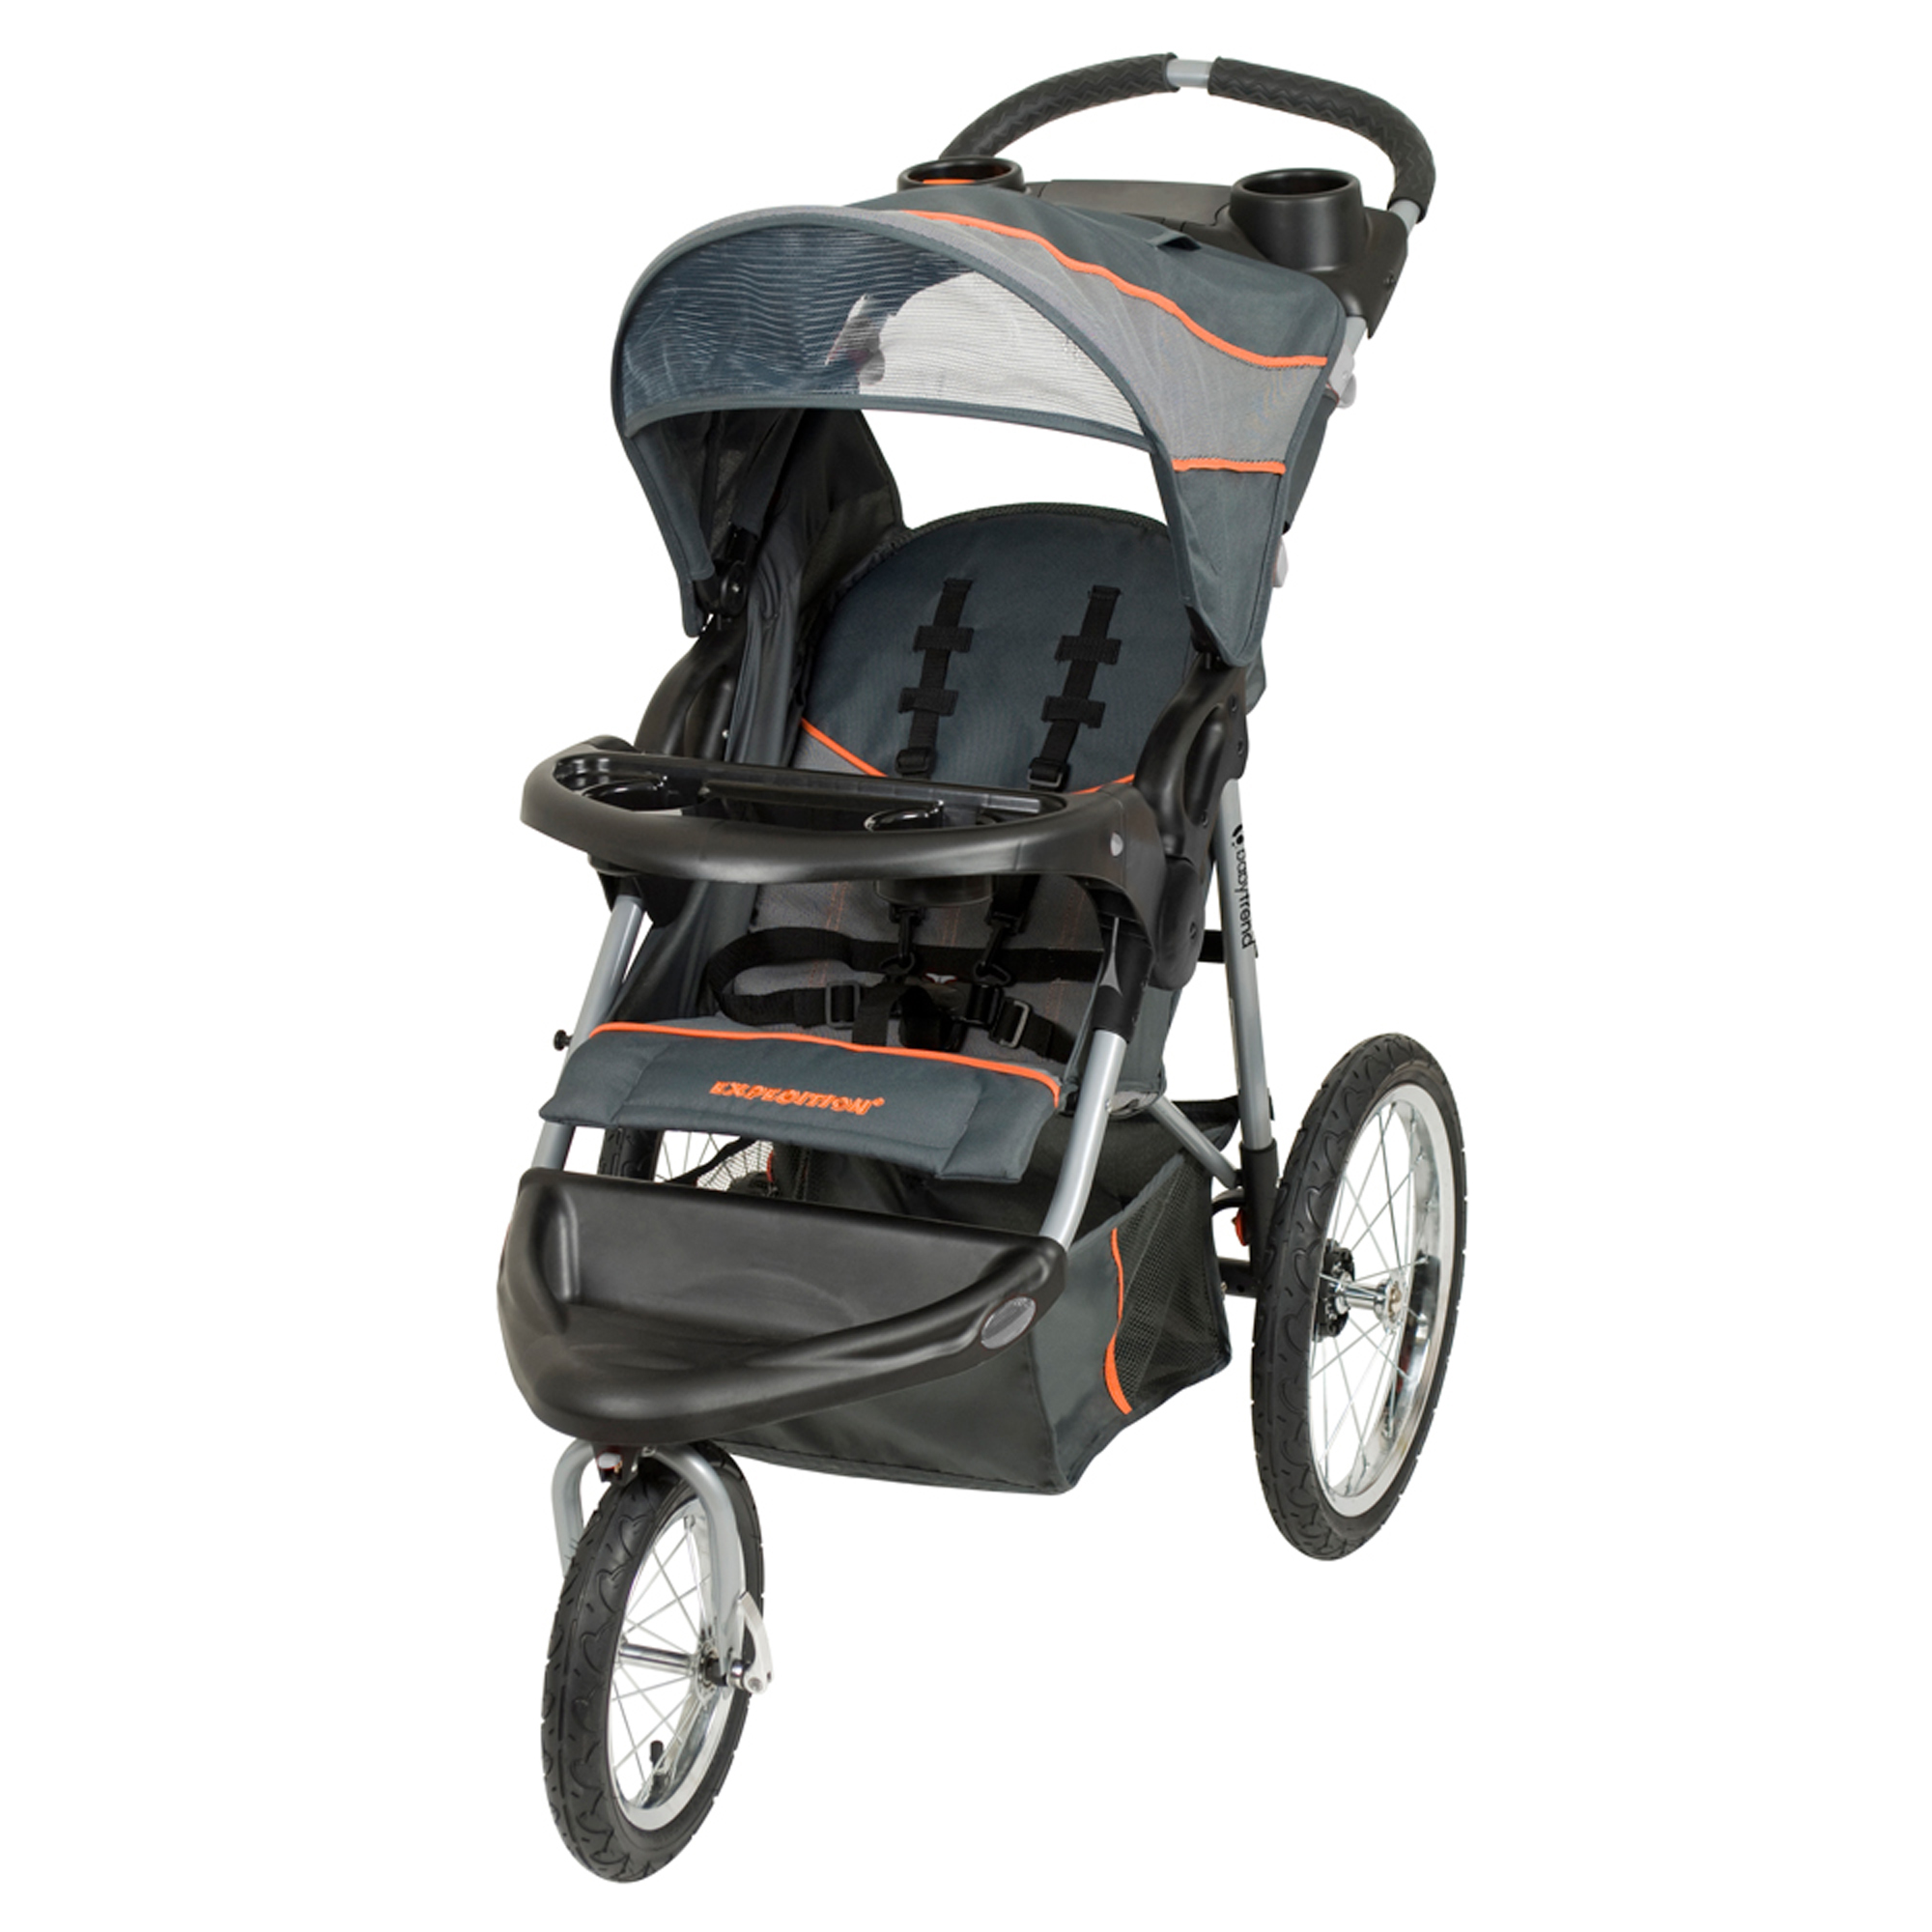 Baby Trend Expedition Jogging Stroller, Vanguard - image 1 of 6